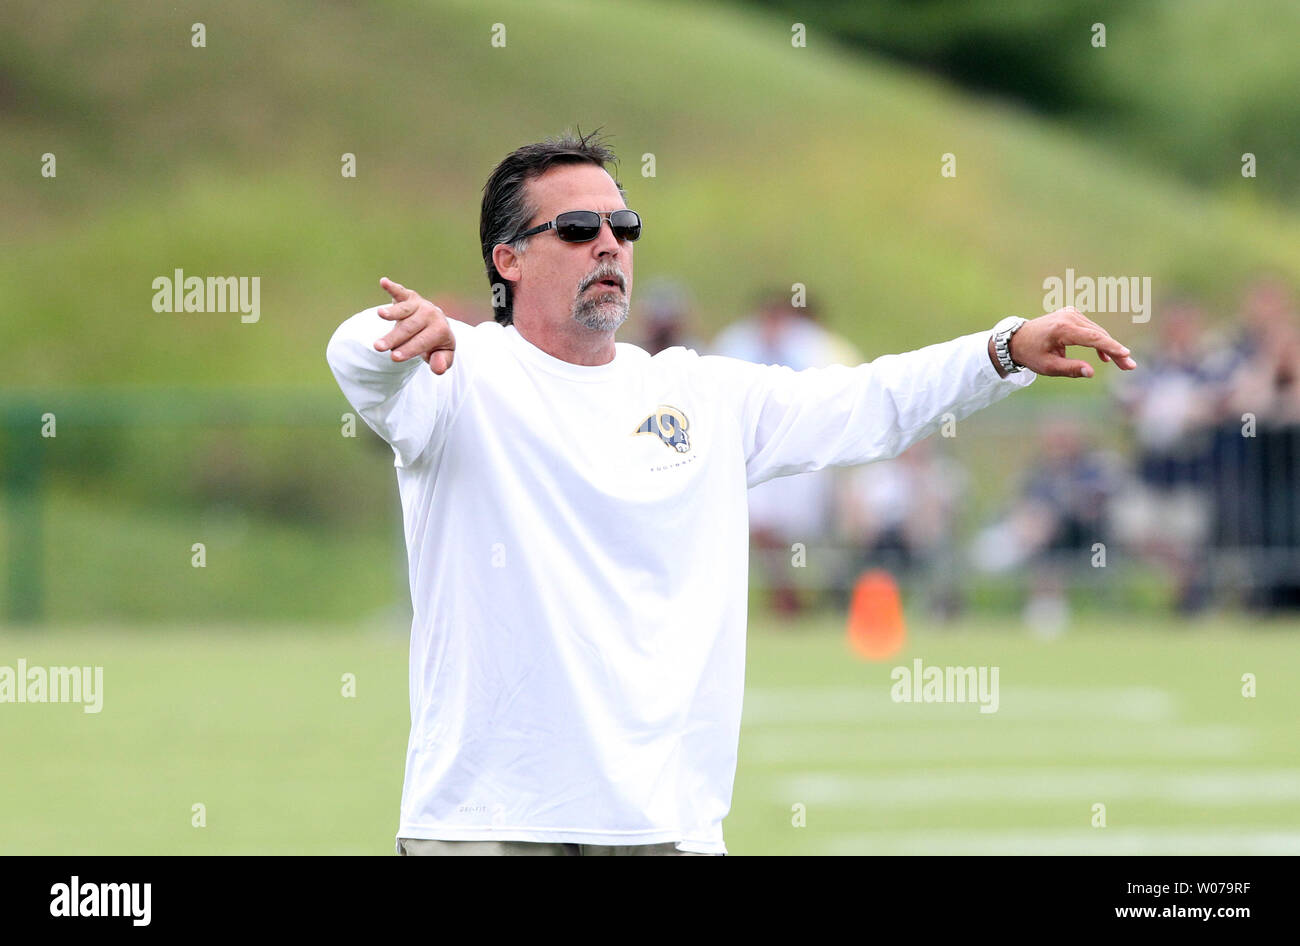 St. Louis Rams head football coach Jeff Fisher gives direction during training camp at the team practice facility in Earth City , Missouri on July 29, 2013.   UPI/Bill Greenblatt Stock Photo